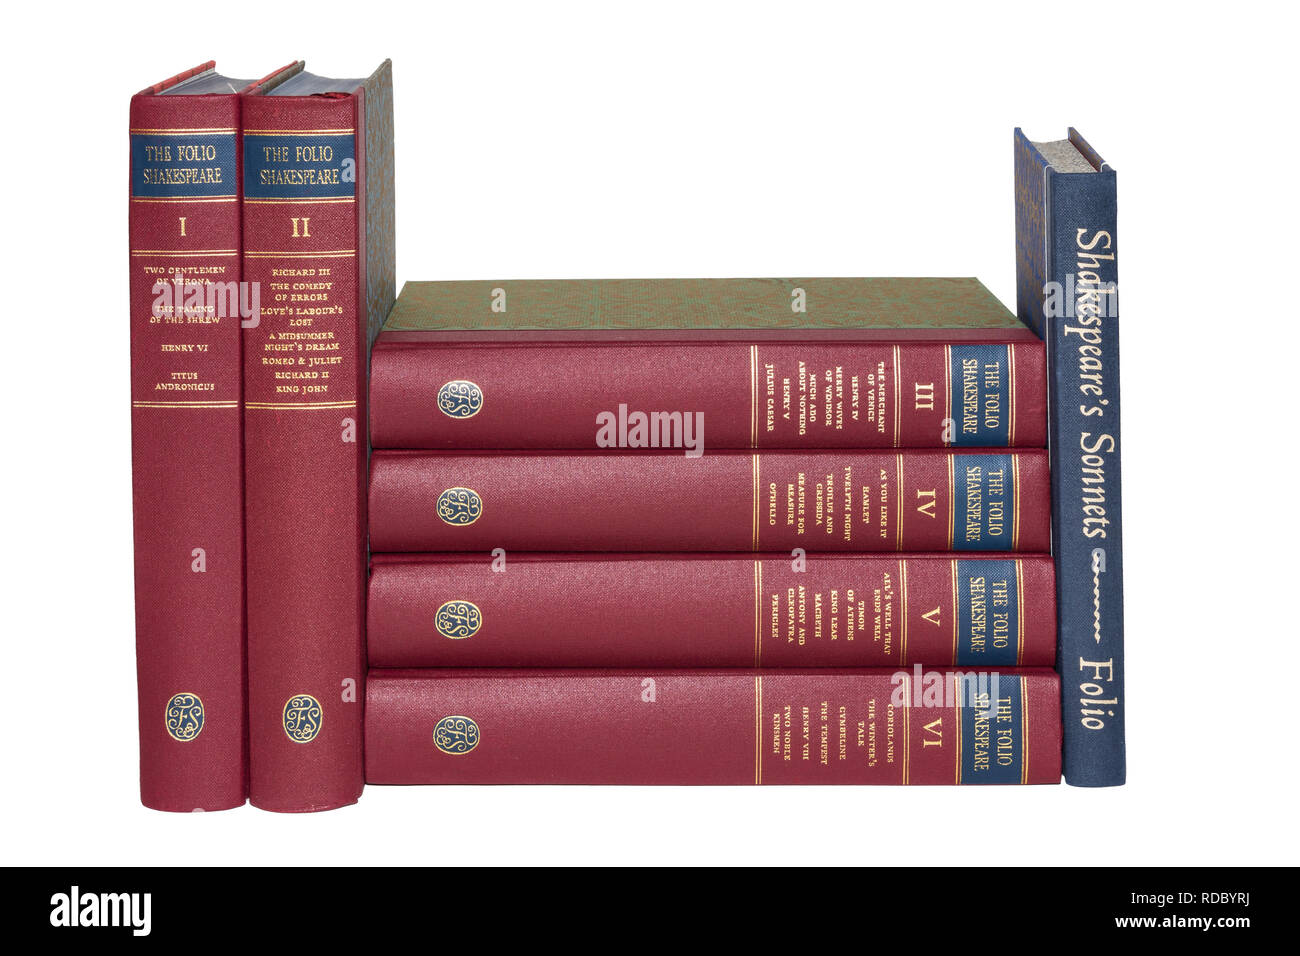 The Folio Society editions of The plays and sonnets of Shakespeare,  arranged together with spines shown. Isolated on white background Stock  Photo - Alamy